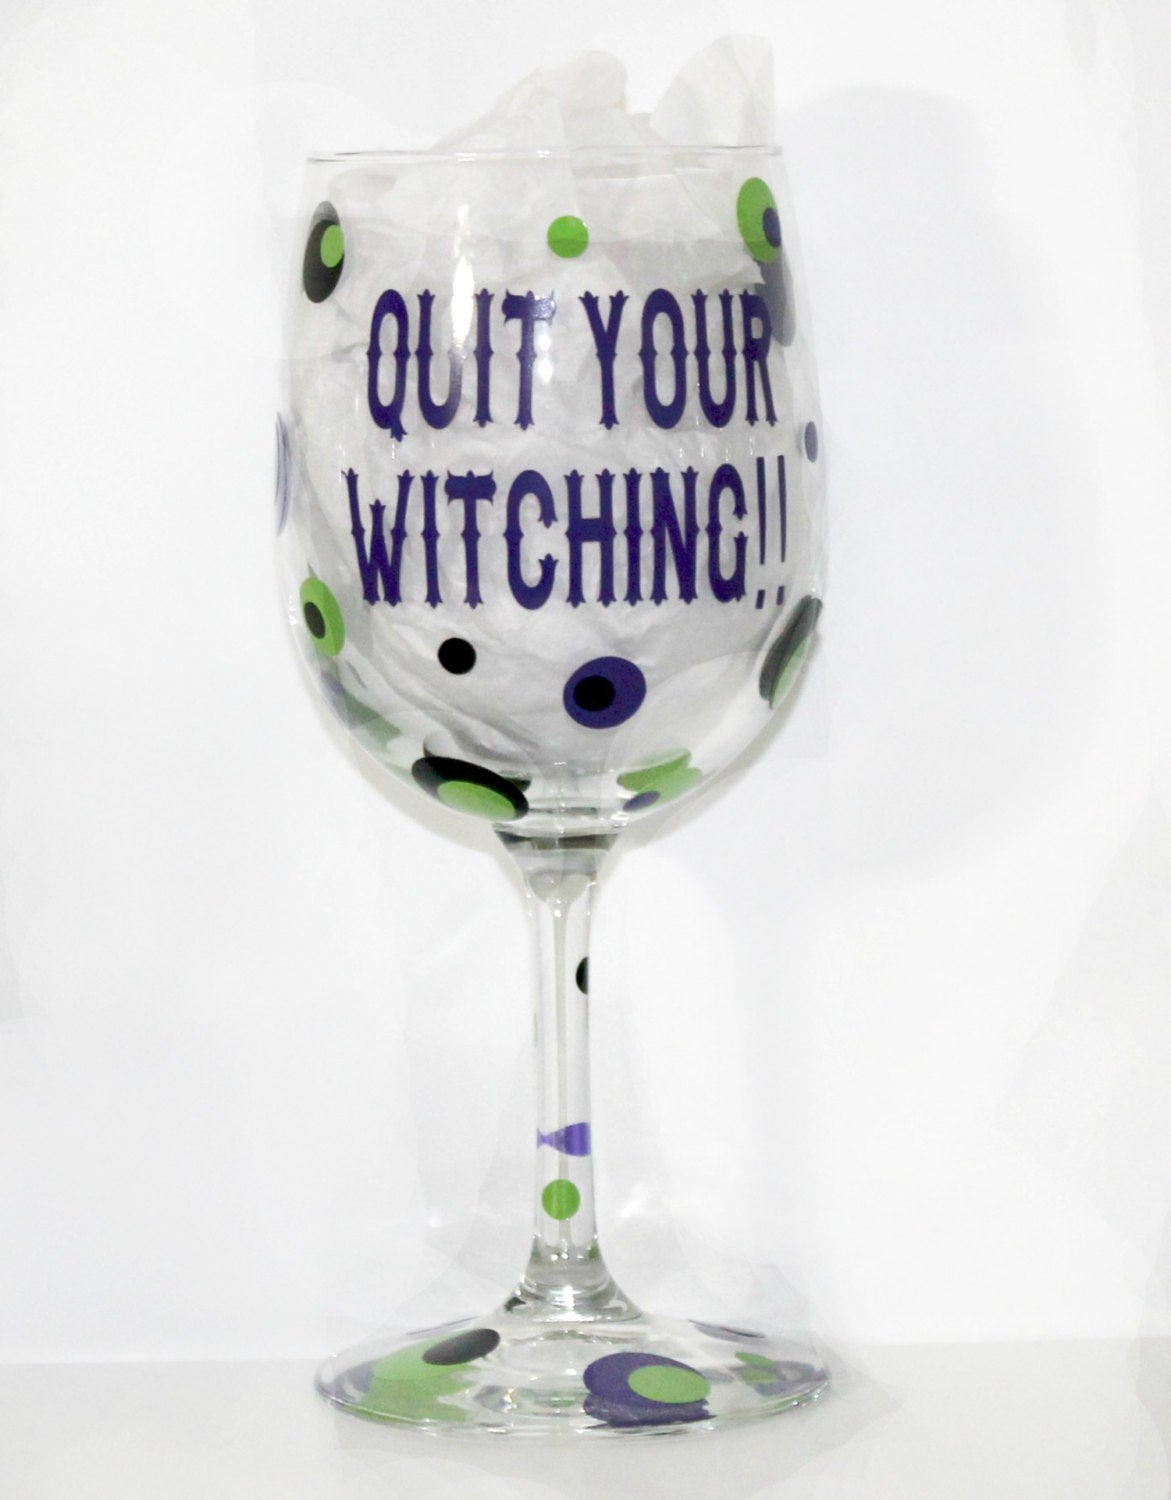 Quit your Witching Halloween Wine Glass - Name - Party - Celebration - Gift Idea - Women - Holiday - Costume - Birthday - Bachelorette